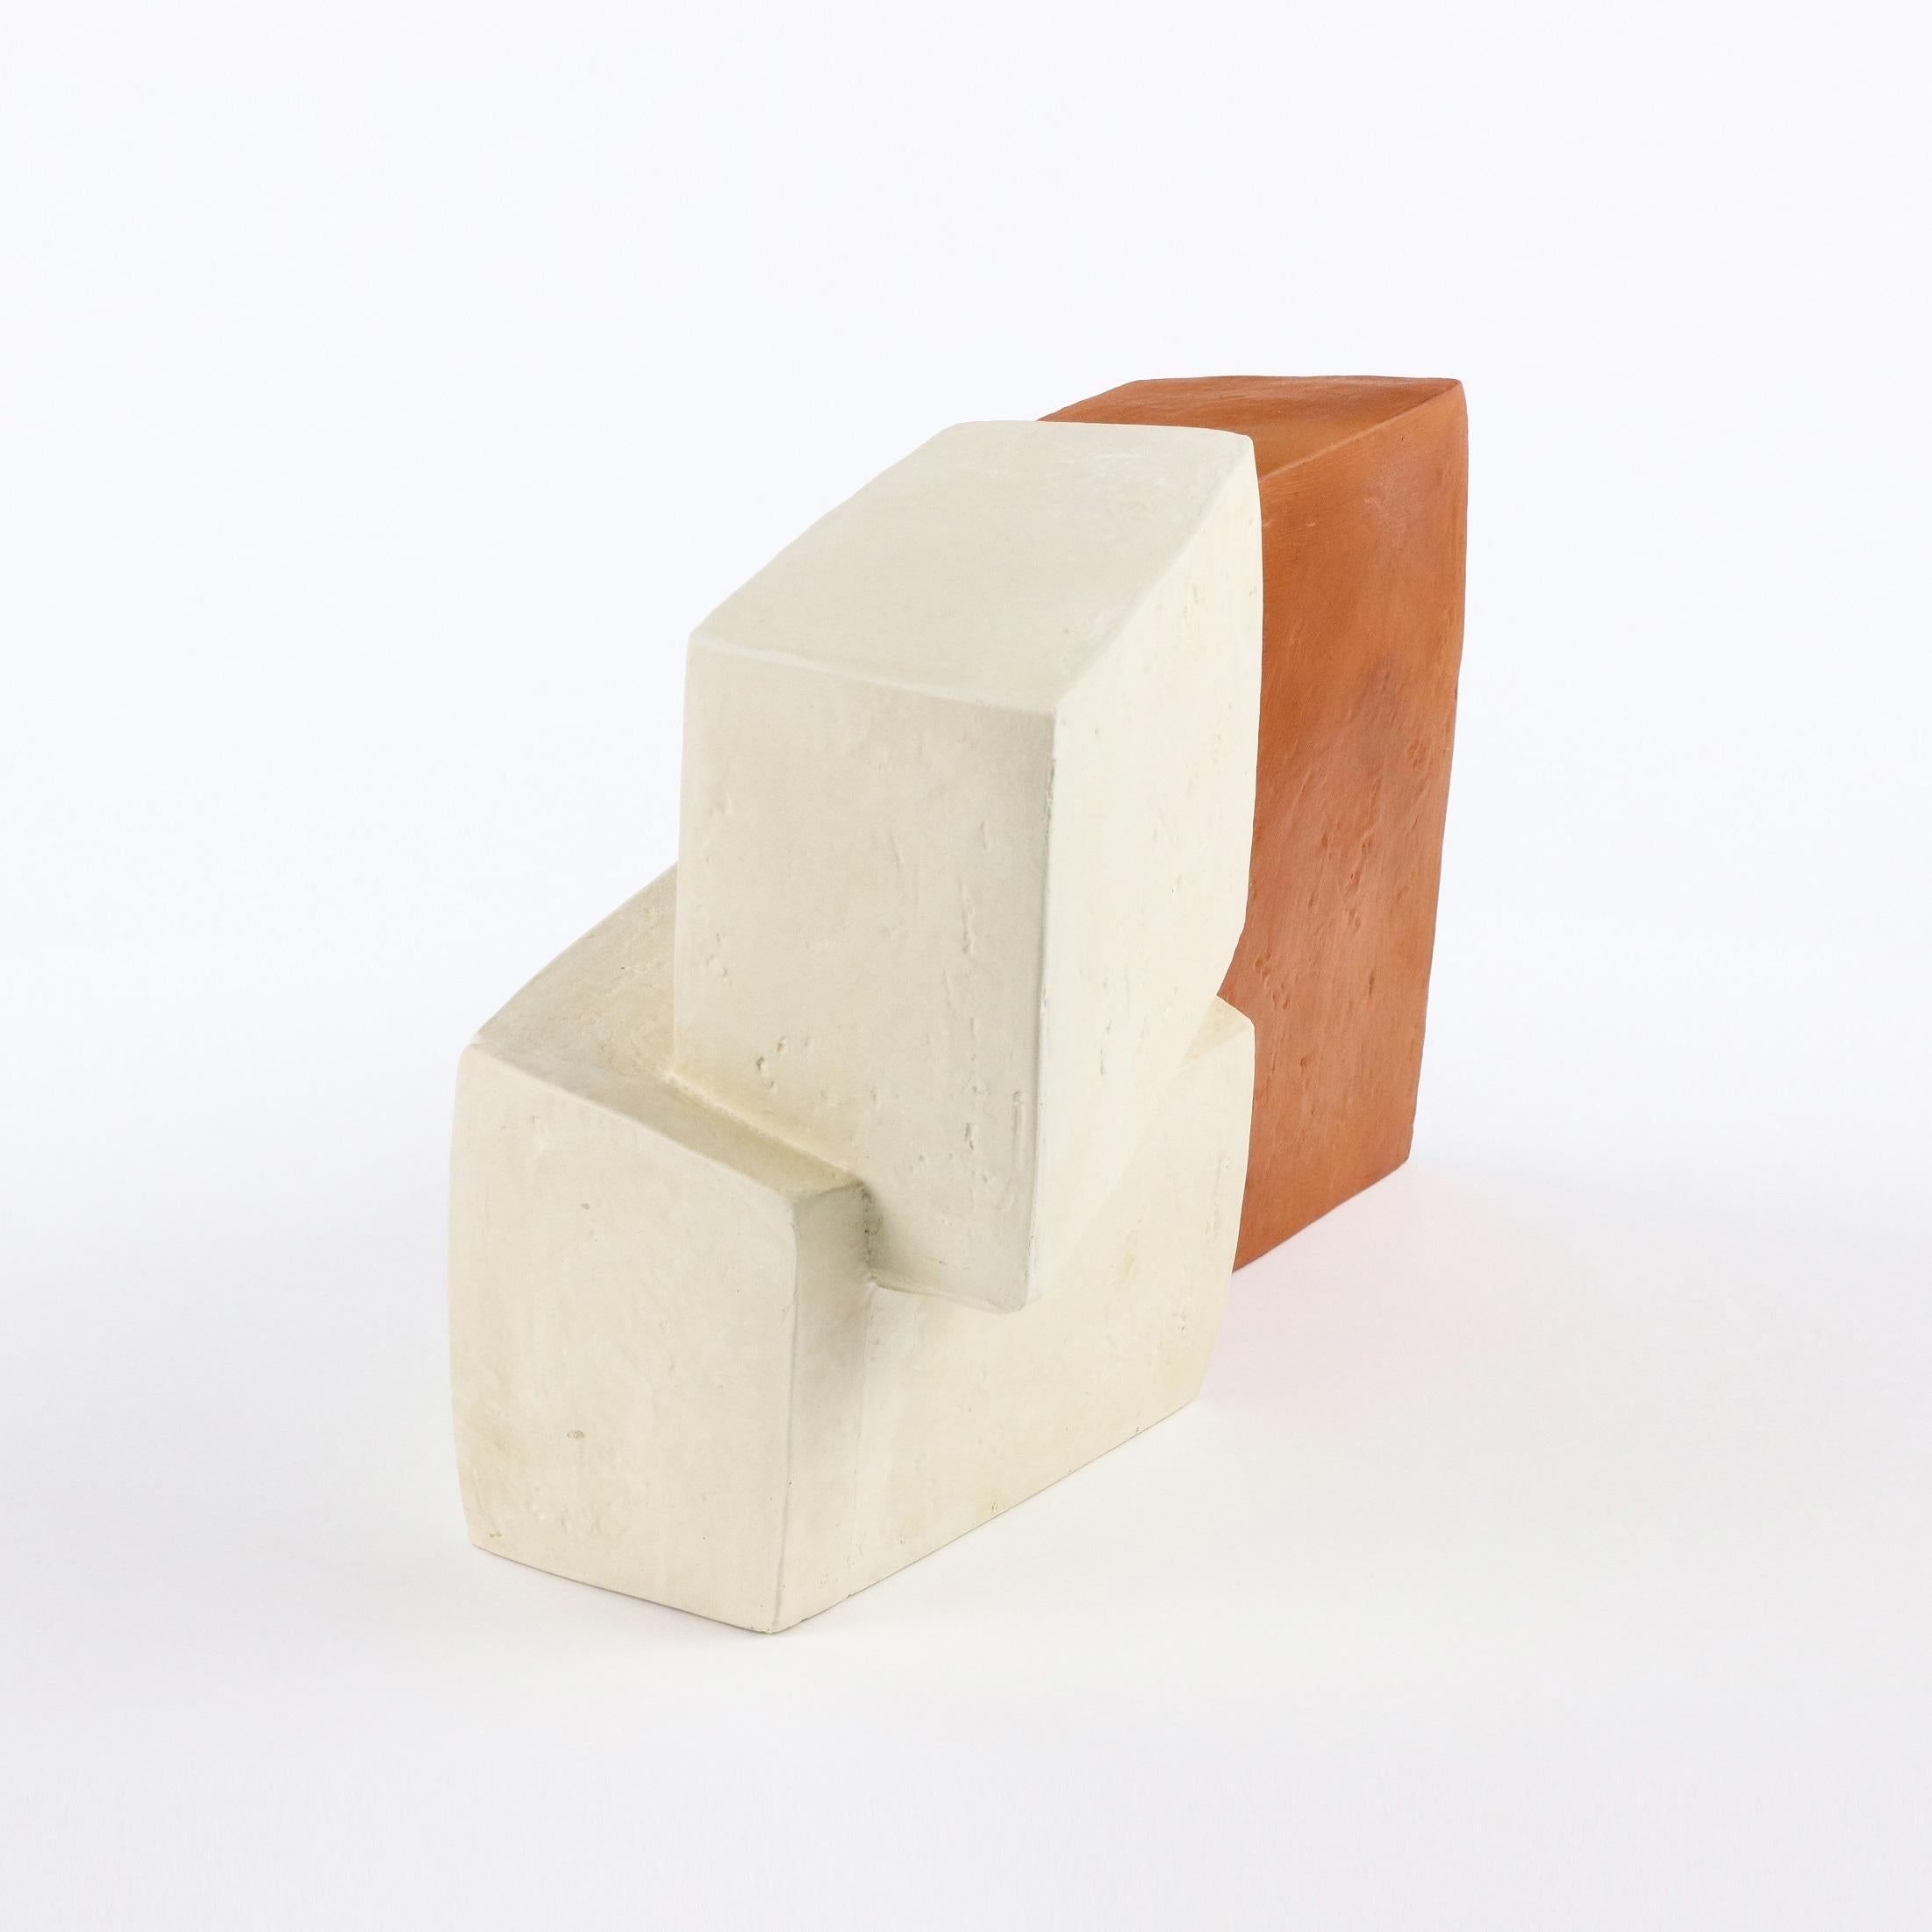 Forms by Delphine Brabant - Abstract geometric sculpture, blocks, white, orange For Sale 2